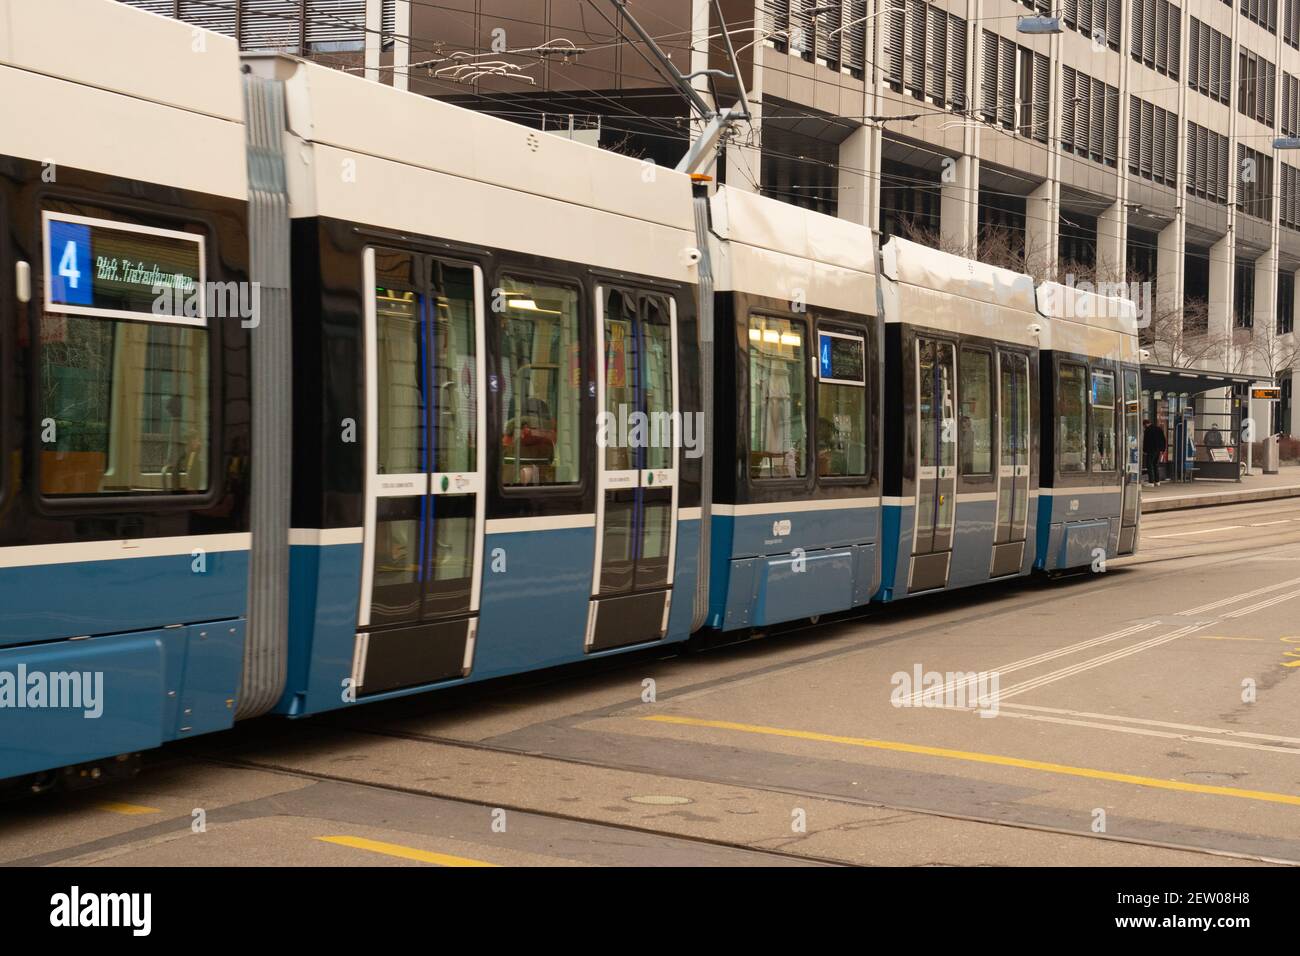 Zurich, Switzerland - February 2nd 2021: The new tram Flexity passing a square Stock Photo